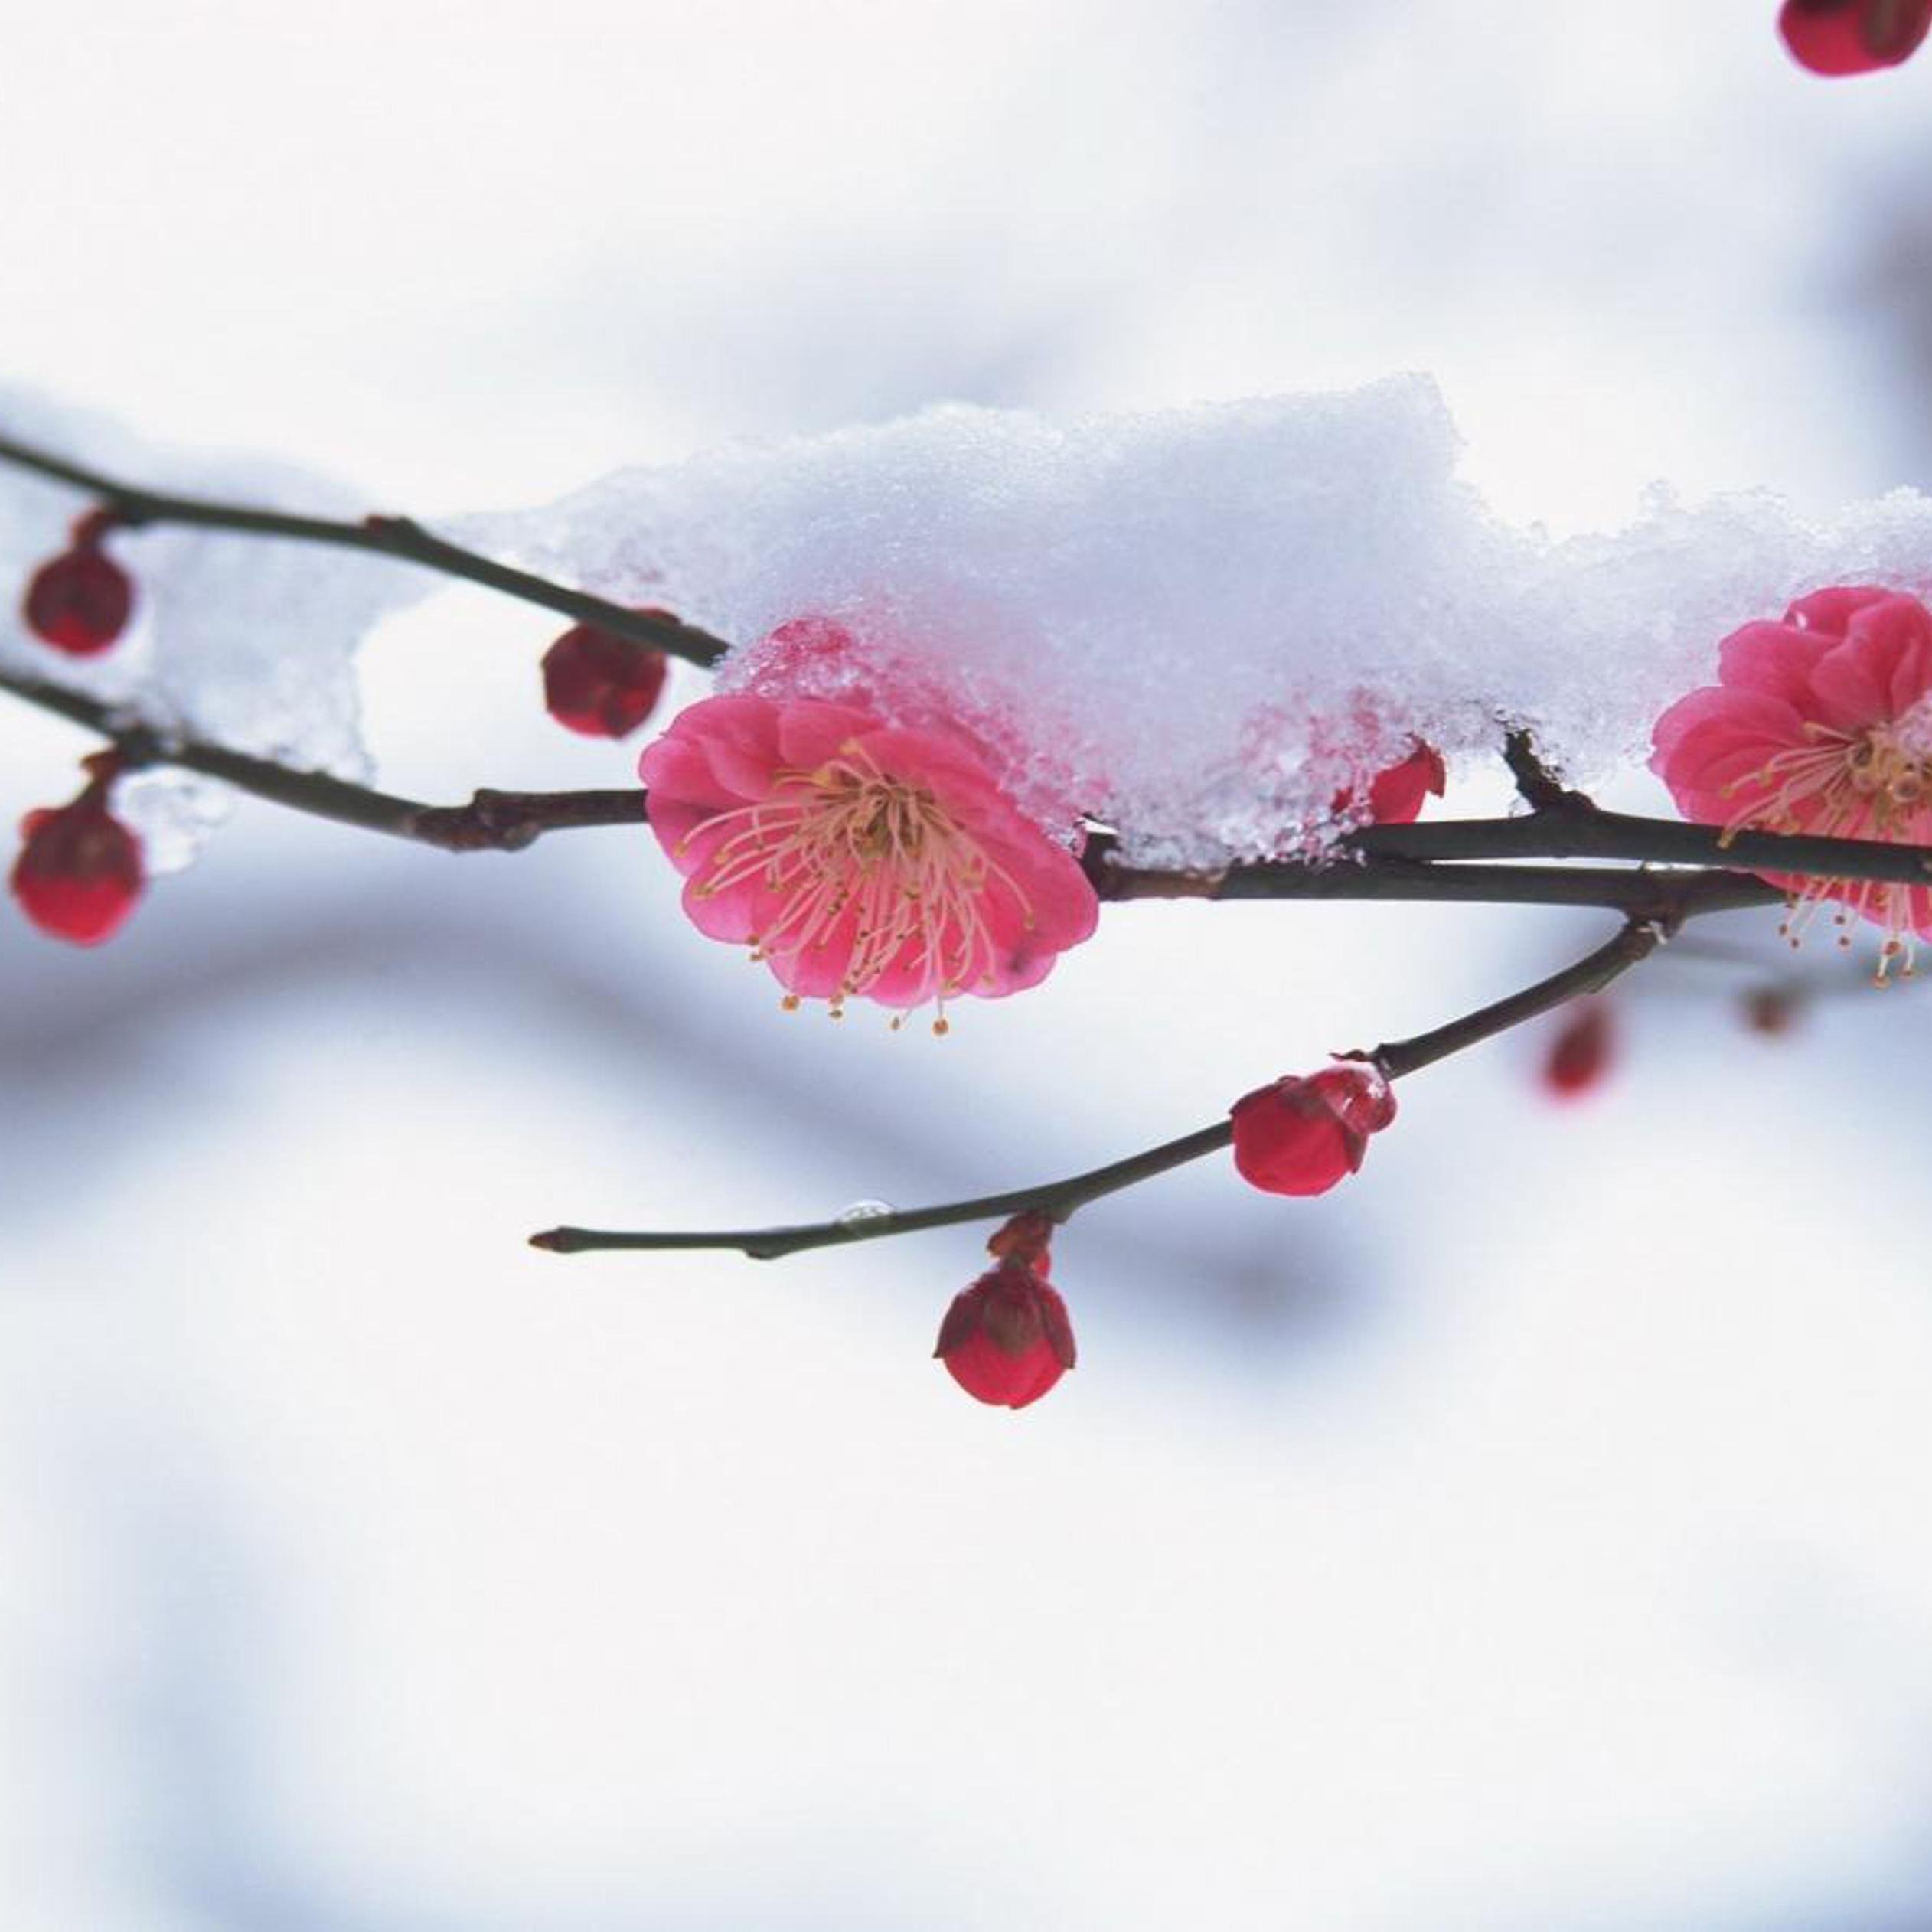 Cherry tree blossom in the middle of winter